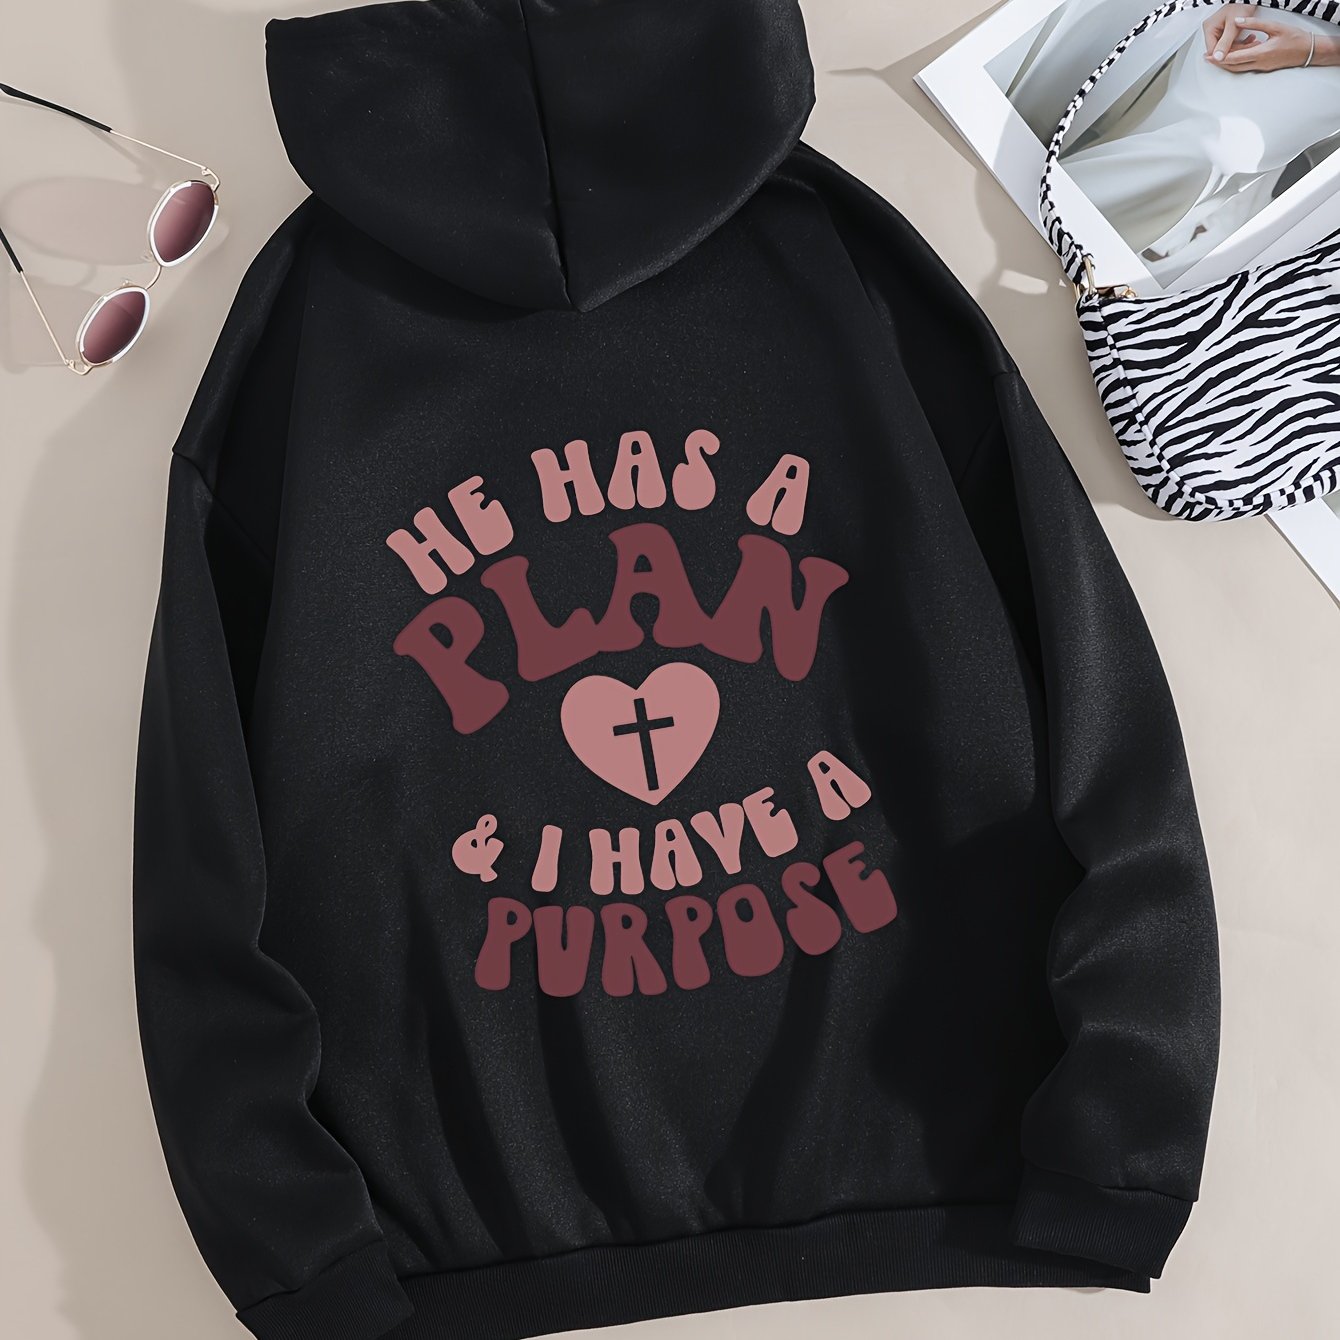 God Has A Plan & I Have A Purpose Plus Size Women's Christian Pullover Hooded Sweatshirt claimedbygoddesigns